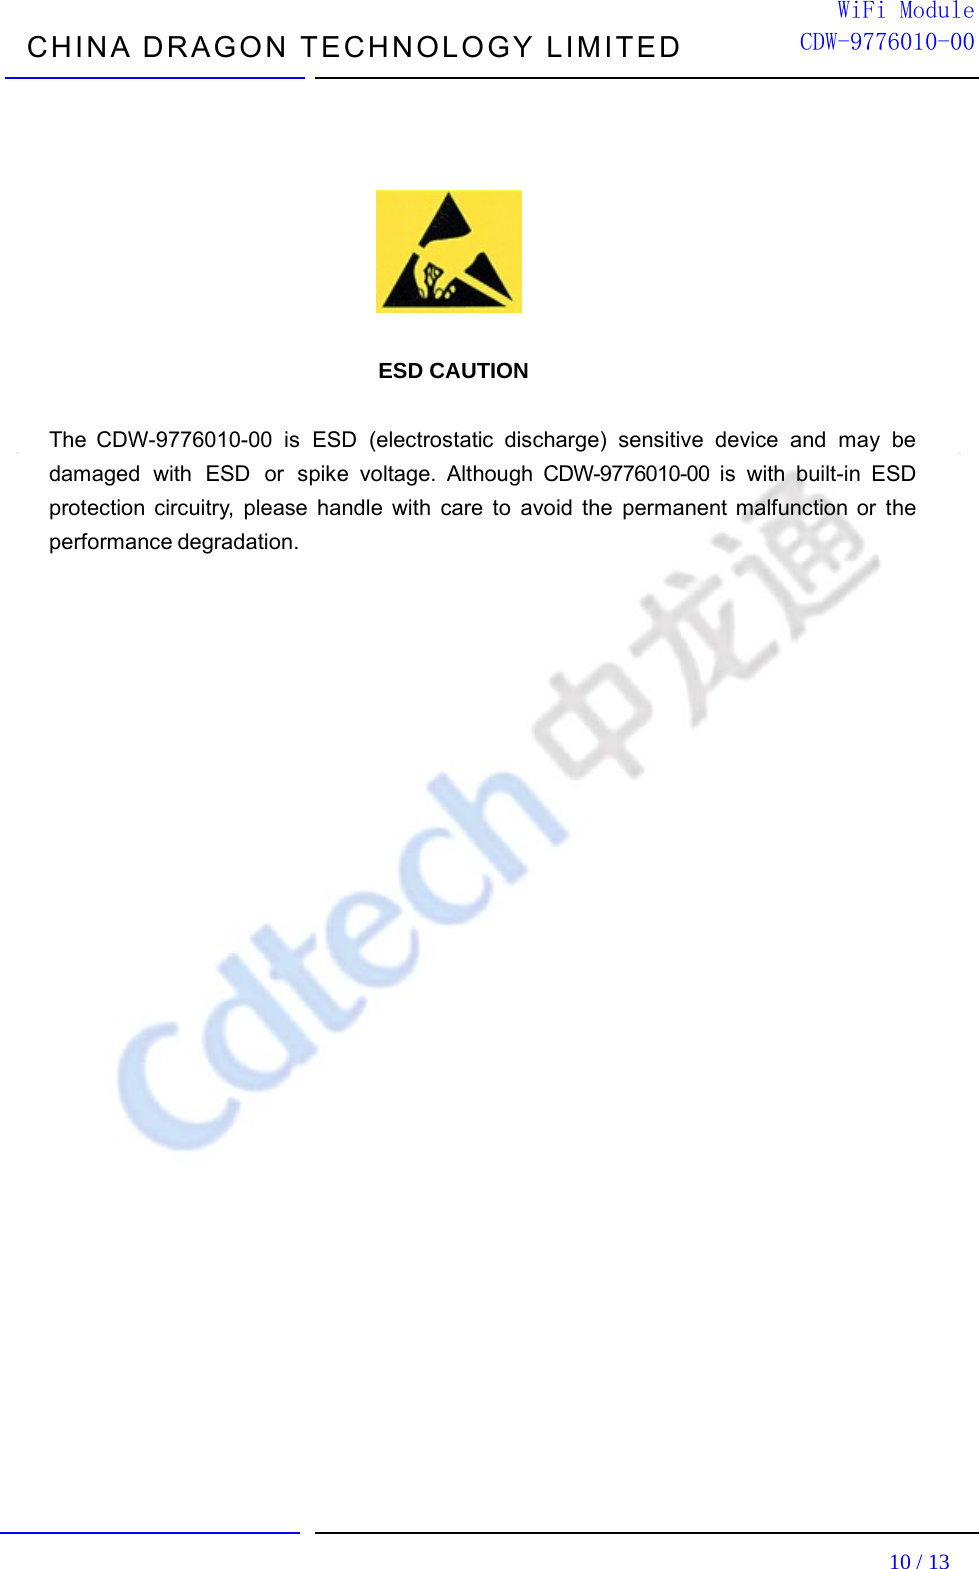  CHINA DRAGON TECHNOLOGY LIMITED                                                                         10 / 13  WiFi ModuleCDW-9776010-00                                   ESD CAUTION  The CDW-9776010-00 is ESD (electrostatic discharge) sensitive device and may be damaged with ESD or spike voltage. Although CDW-9776010-00 is with built-in ESD protection circuitry, please handle with care to avoid the permanent malfunction or the performance degradation.                           